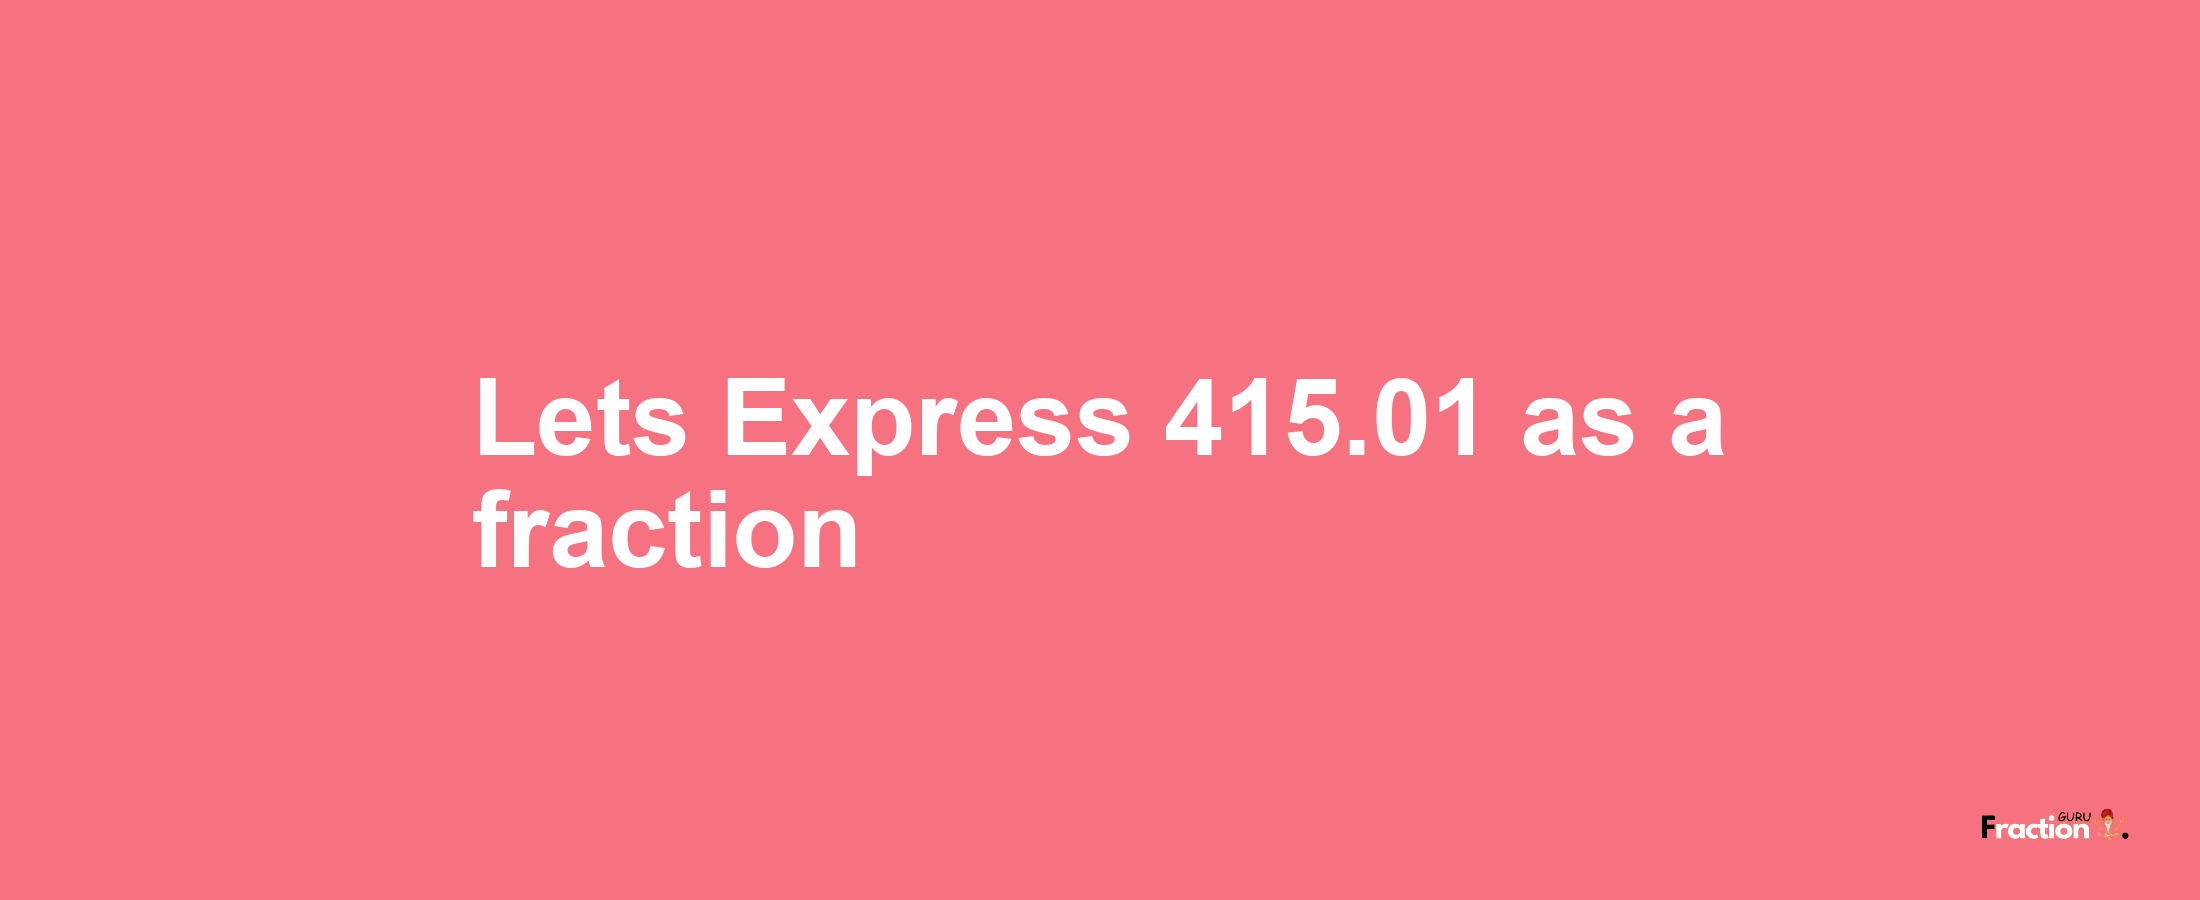 Lets Express 415.01 as afraction